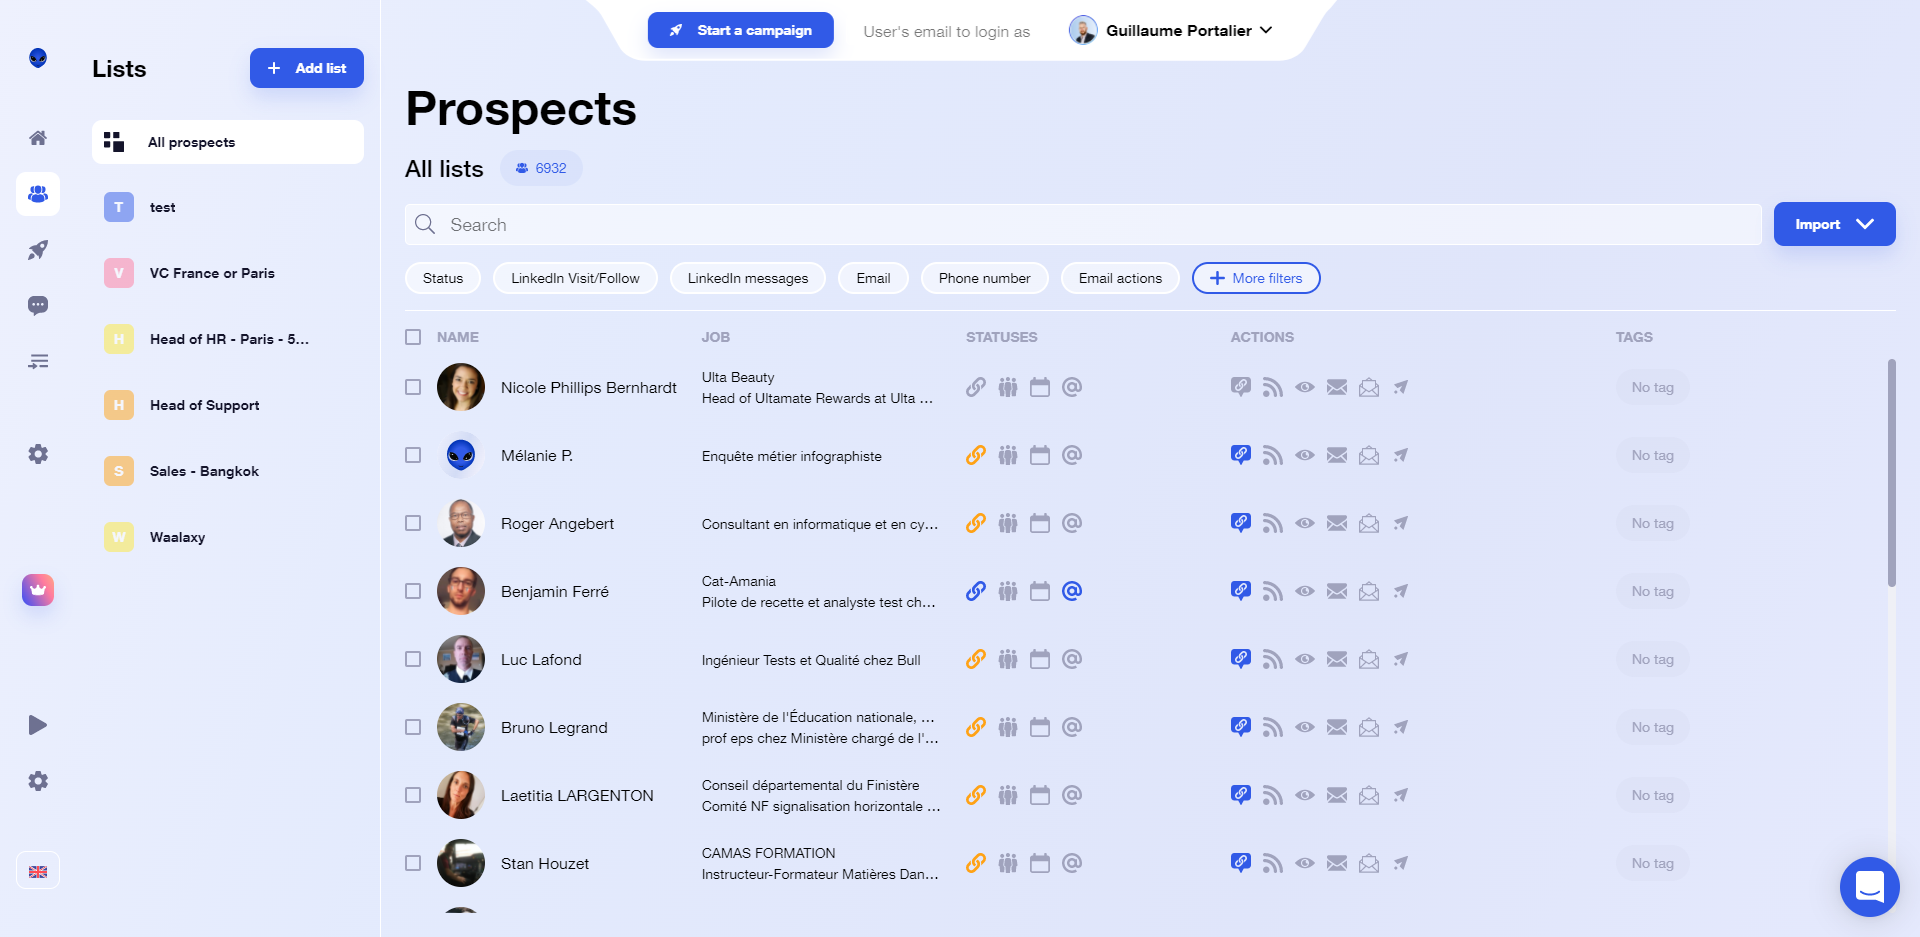 Prospect page